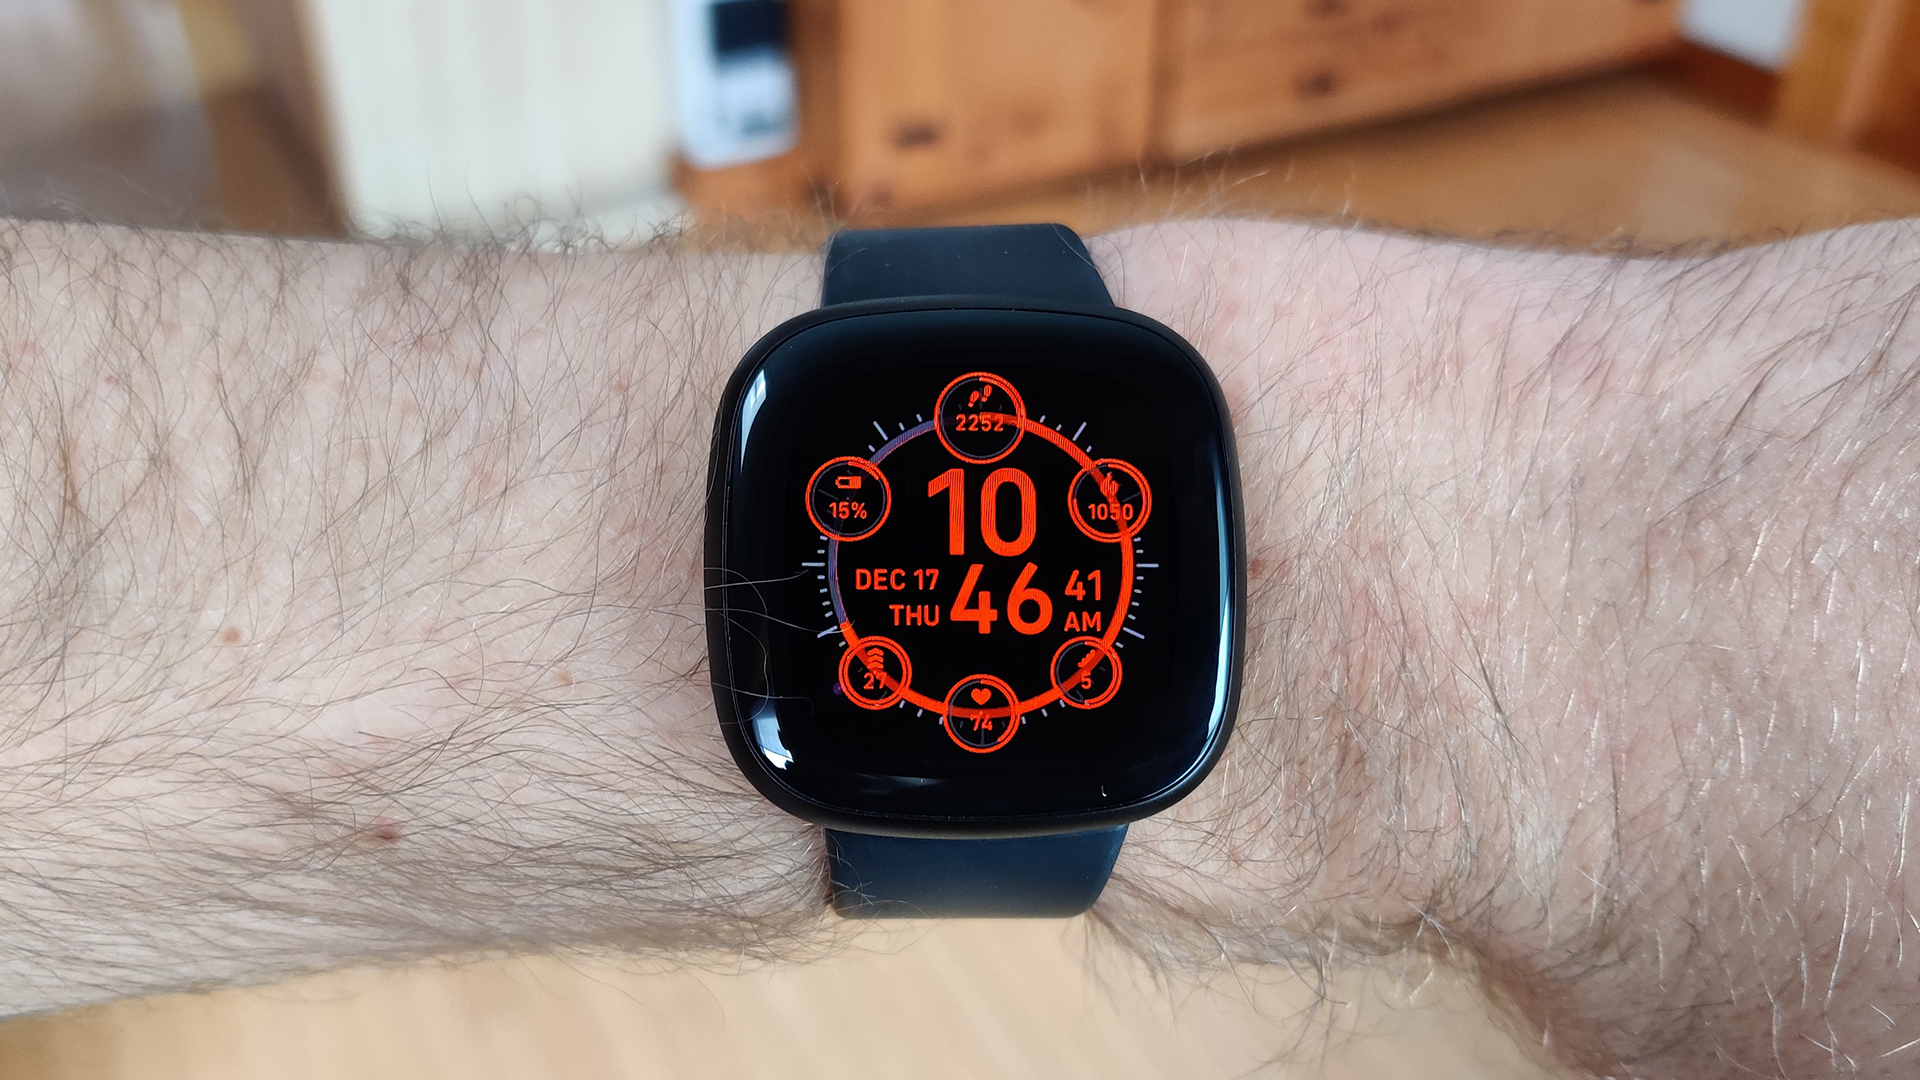 Fitbit Versa 3 review: A good watch with solid value - Android Authority